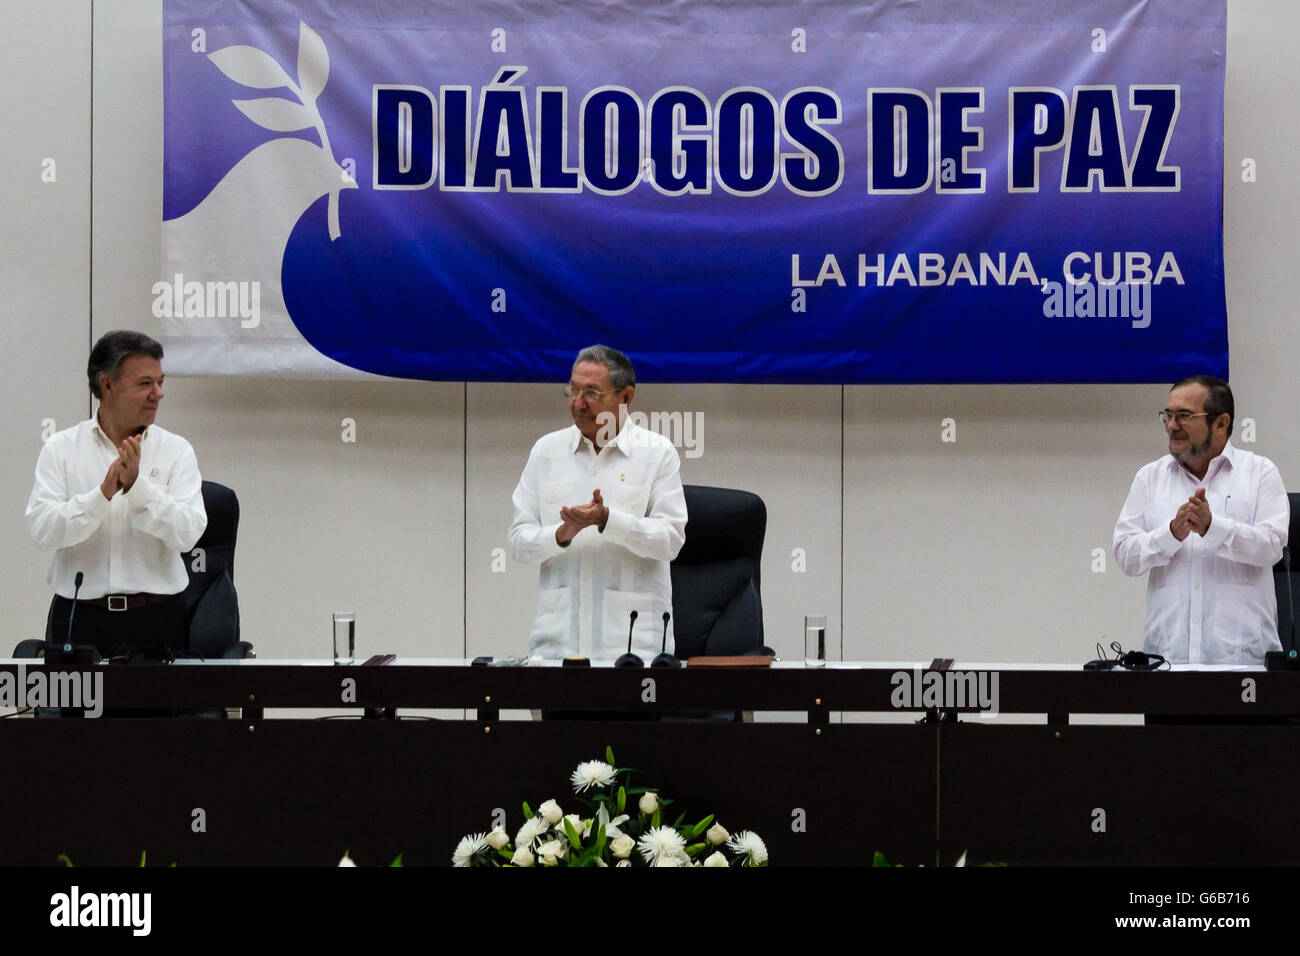 Havana, Cuba. 23rd June, 2016. Colombian President Juan Manuel Santos (L) and Timoleon Jimenez (R), the top leader of the Revolutionary Armed Forces of Colombia (FARC), sign a pact in Havana, capital of Cuba, June 23, 2016. The Colombian government and the FARC guerrilla group signed a pact on a definitive bilateral ceasefire, marking a major step towards ending a half-century conflict.The conflict had killed more than 220,000 people and displaced millions since 1964. © Liu Bin/Xinhua/Alamy Live News Stock Photo